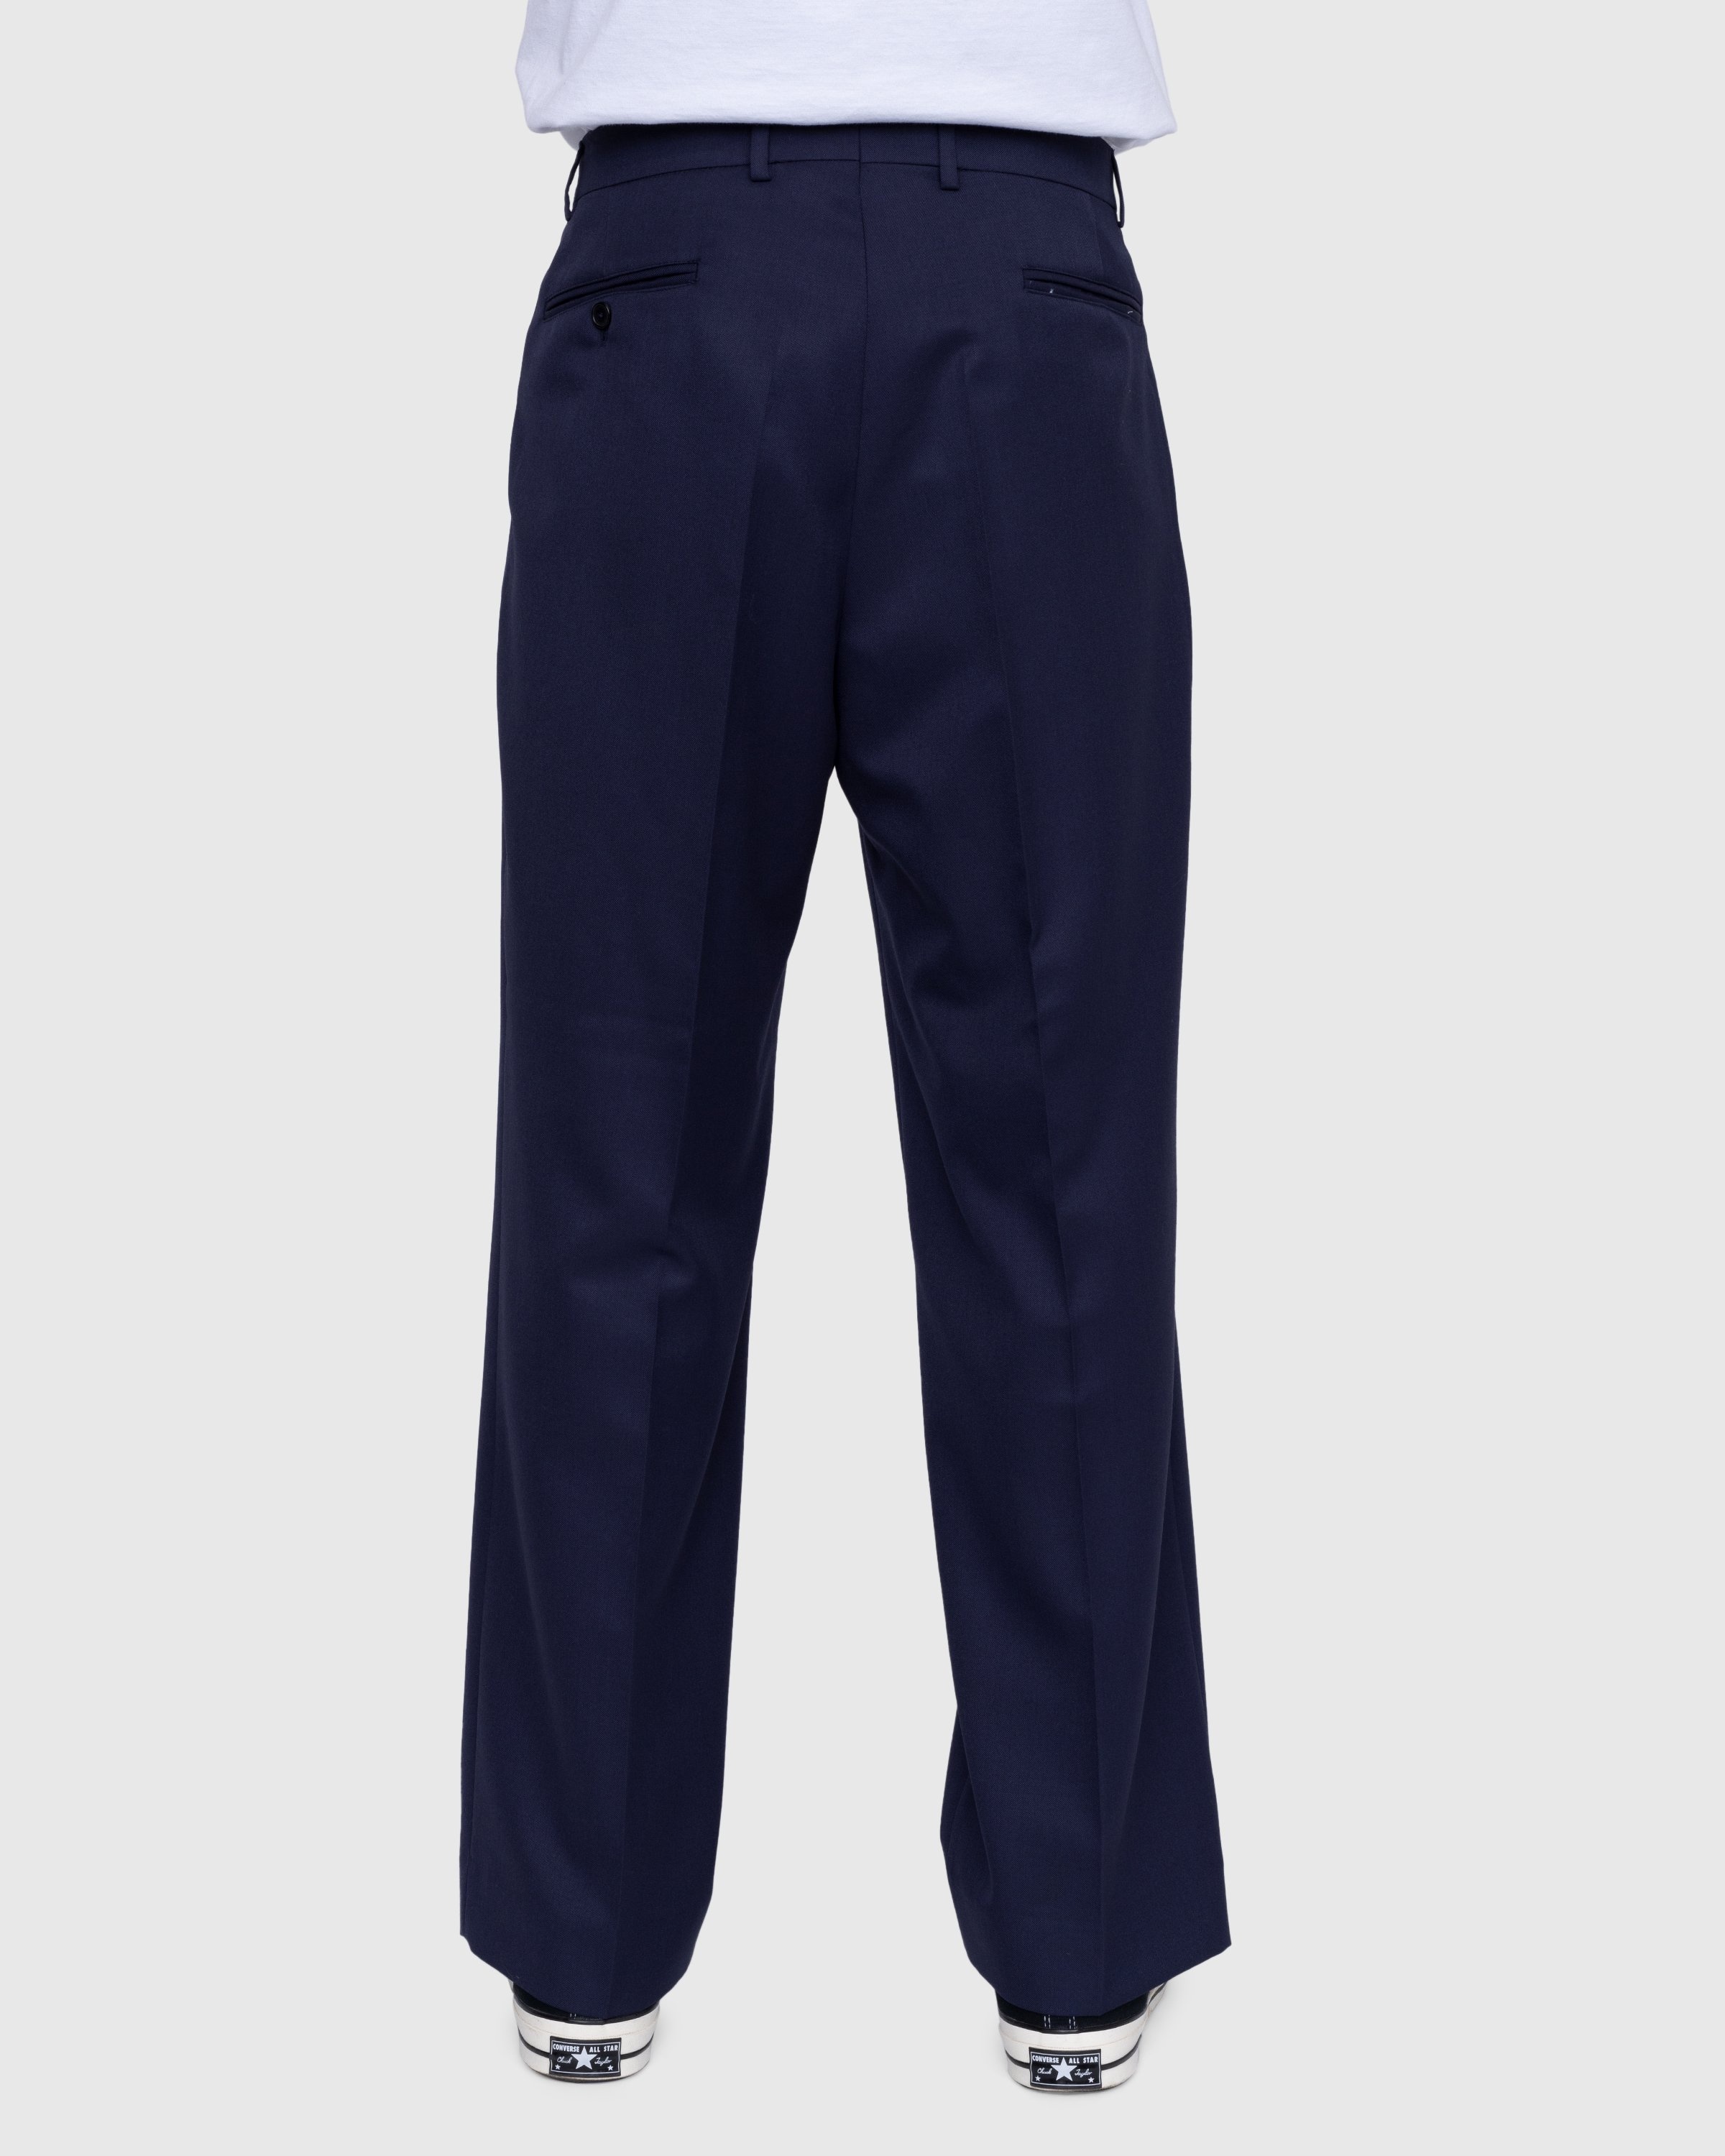 Highsnobiety – Wool Dress Pant Navy - Trousers - Blue - Image 4